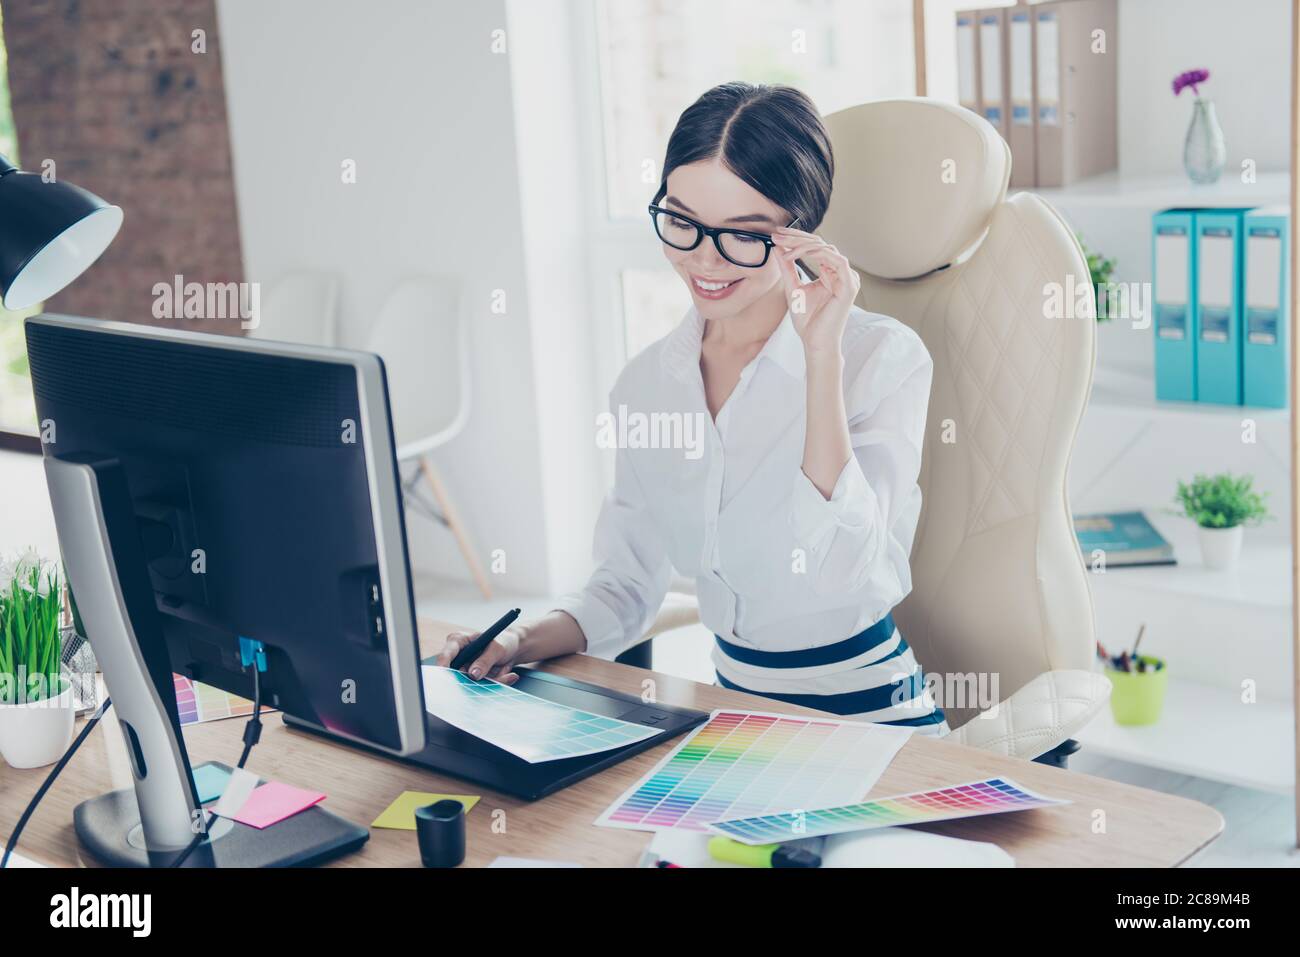 Intelligent young asian graphic designer is working with computer and colors samples, stylus, smiling. She is a successful self employed artist Stock Photo